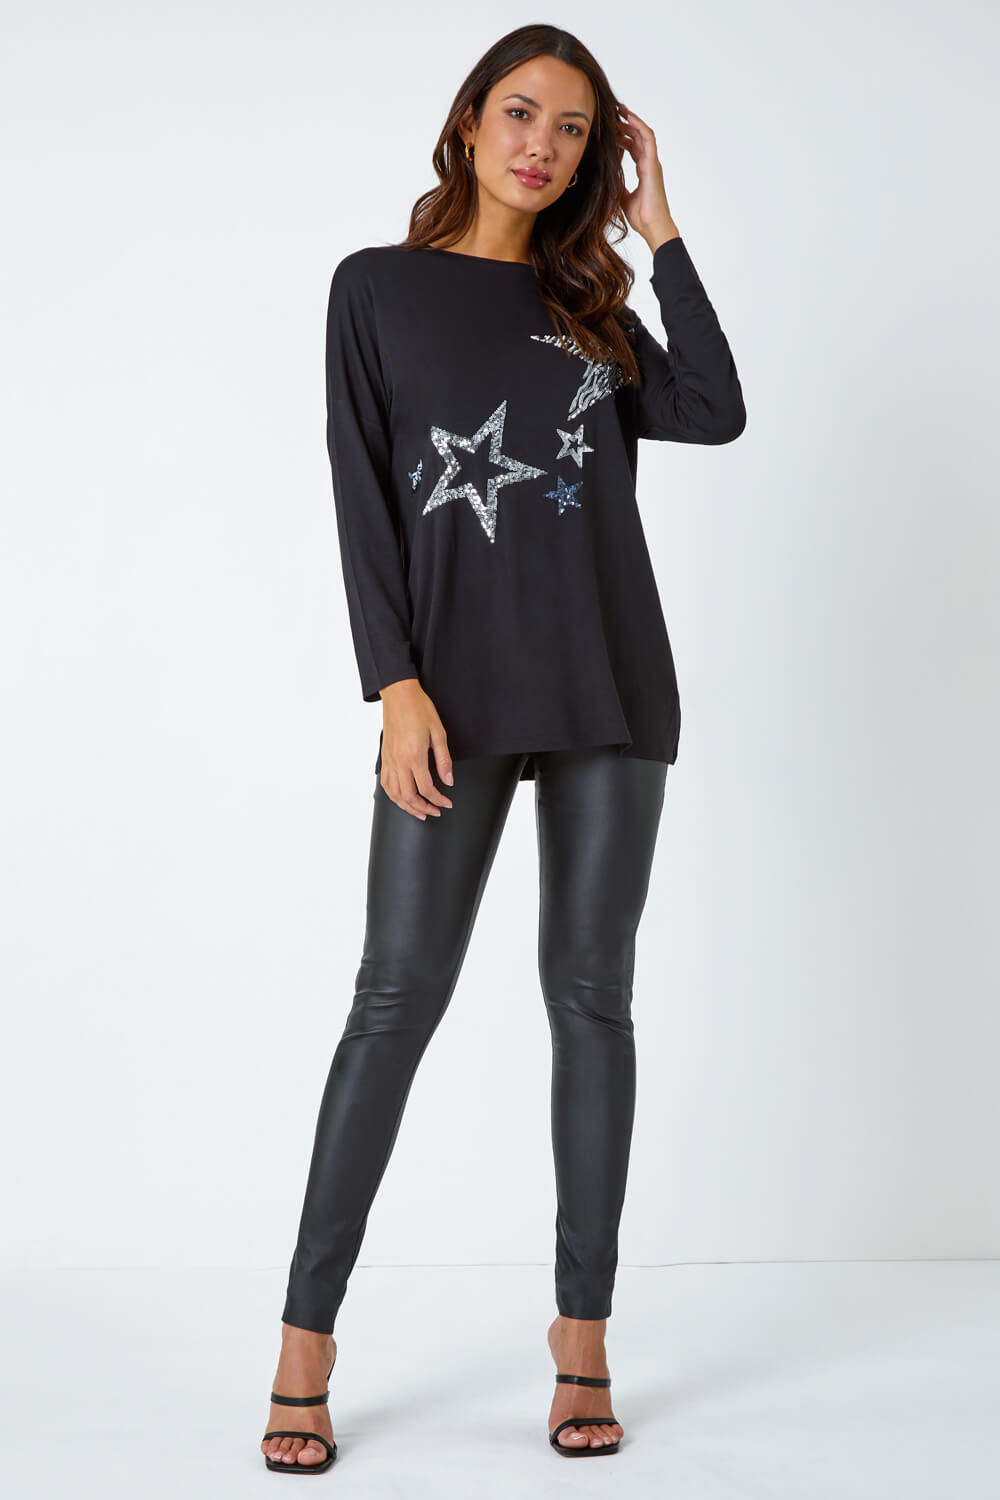 Silver Sequin Star Print Tunic Stretch Top , Image 3 of 5